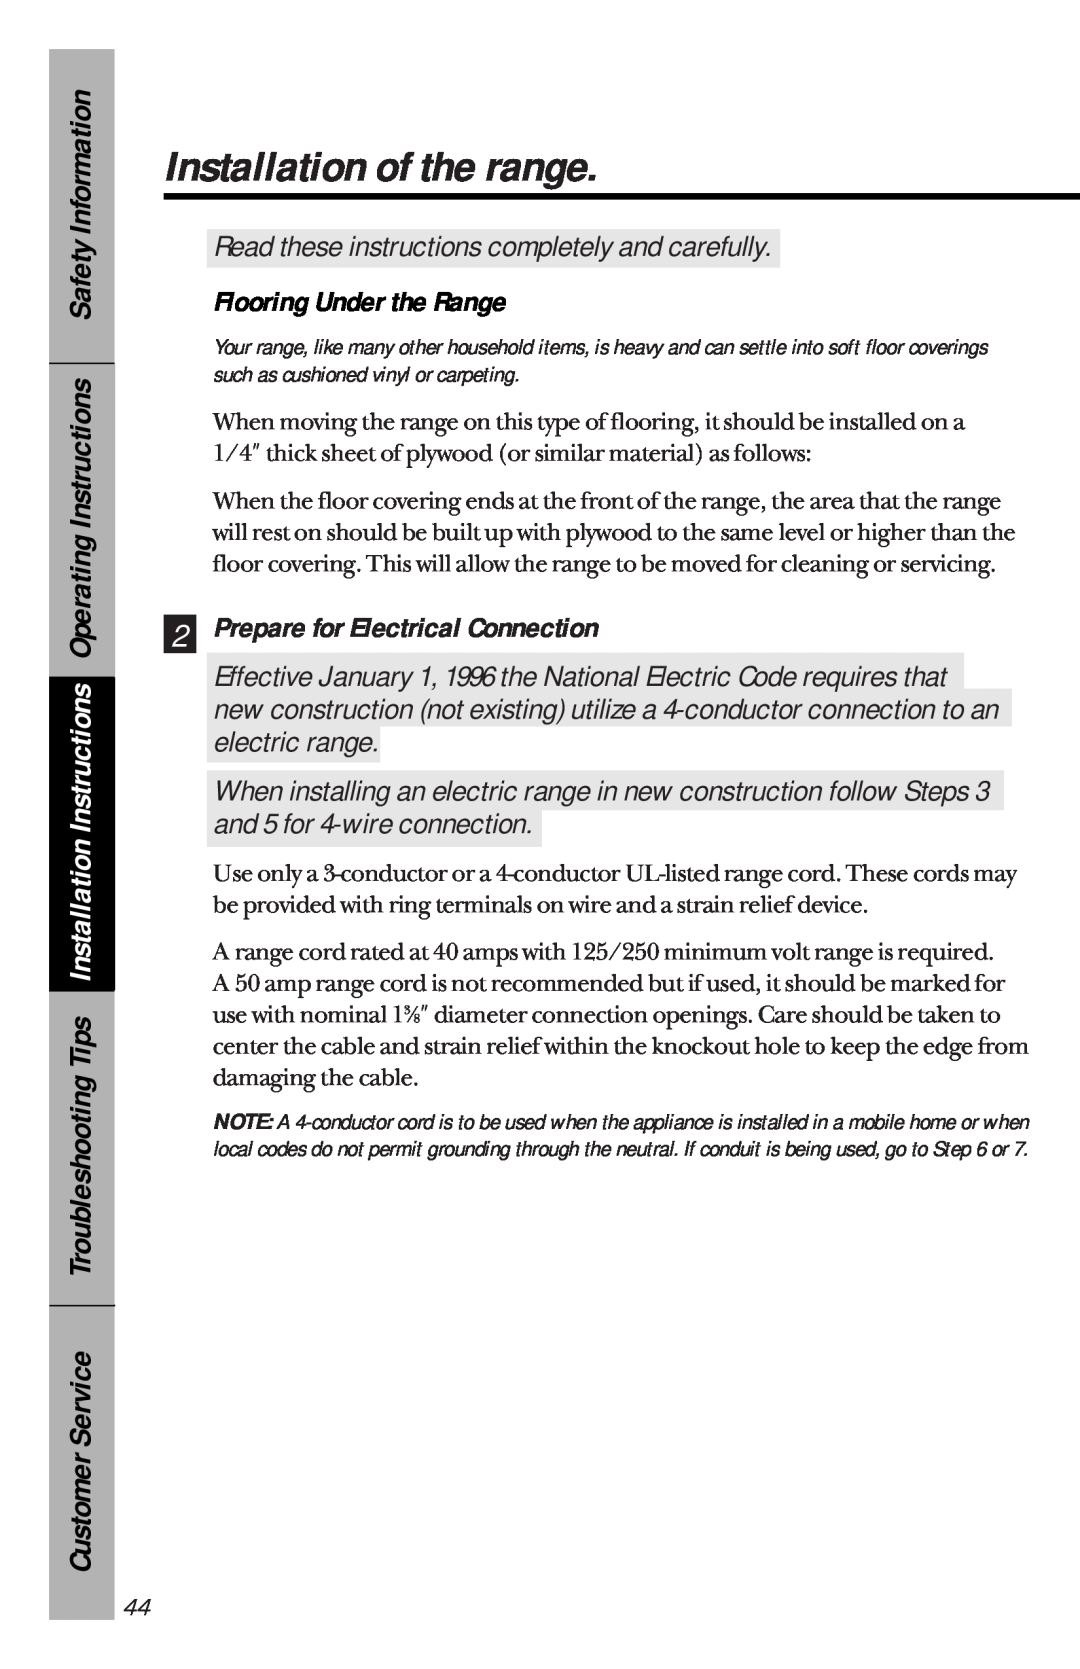 GE 49-8827, 164D3333P069 owner manual Flooring Under the Range, Prepare for Electrical Connection, Installation of the range 